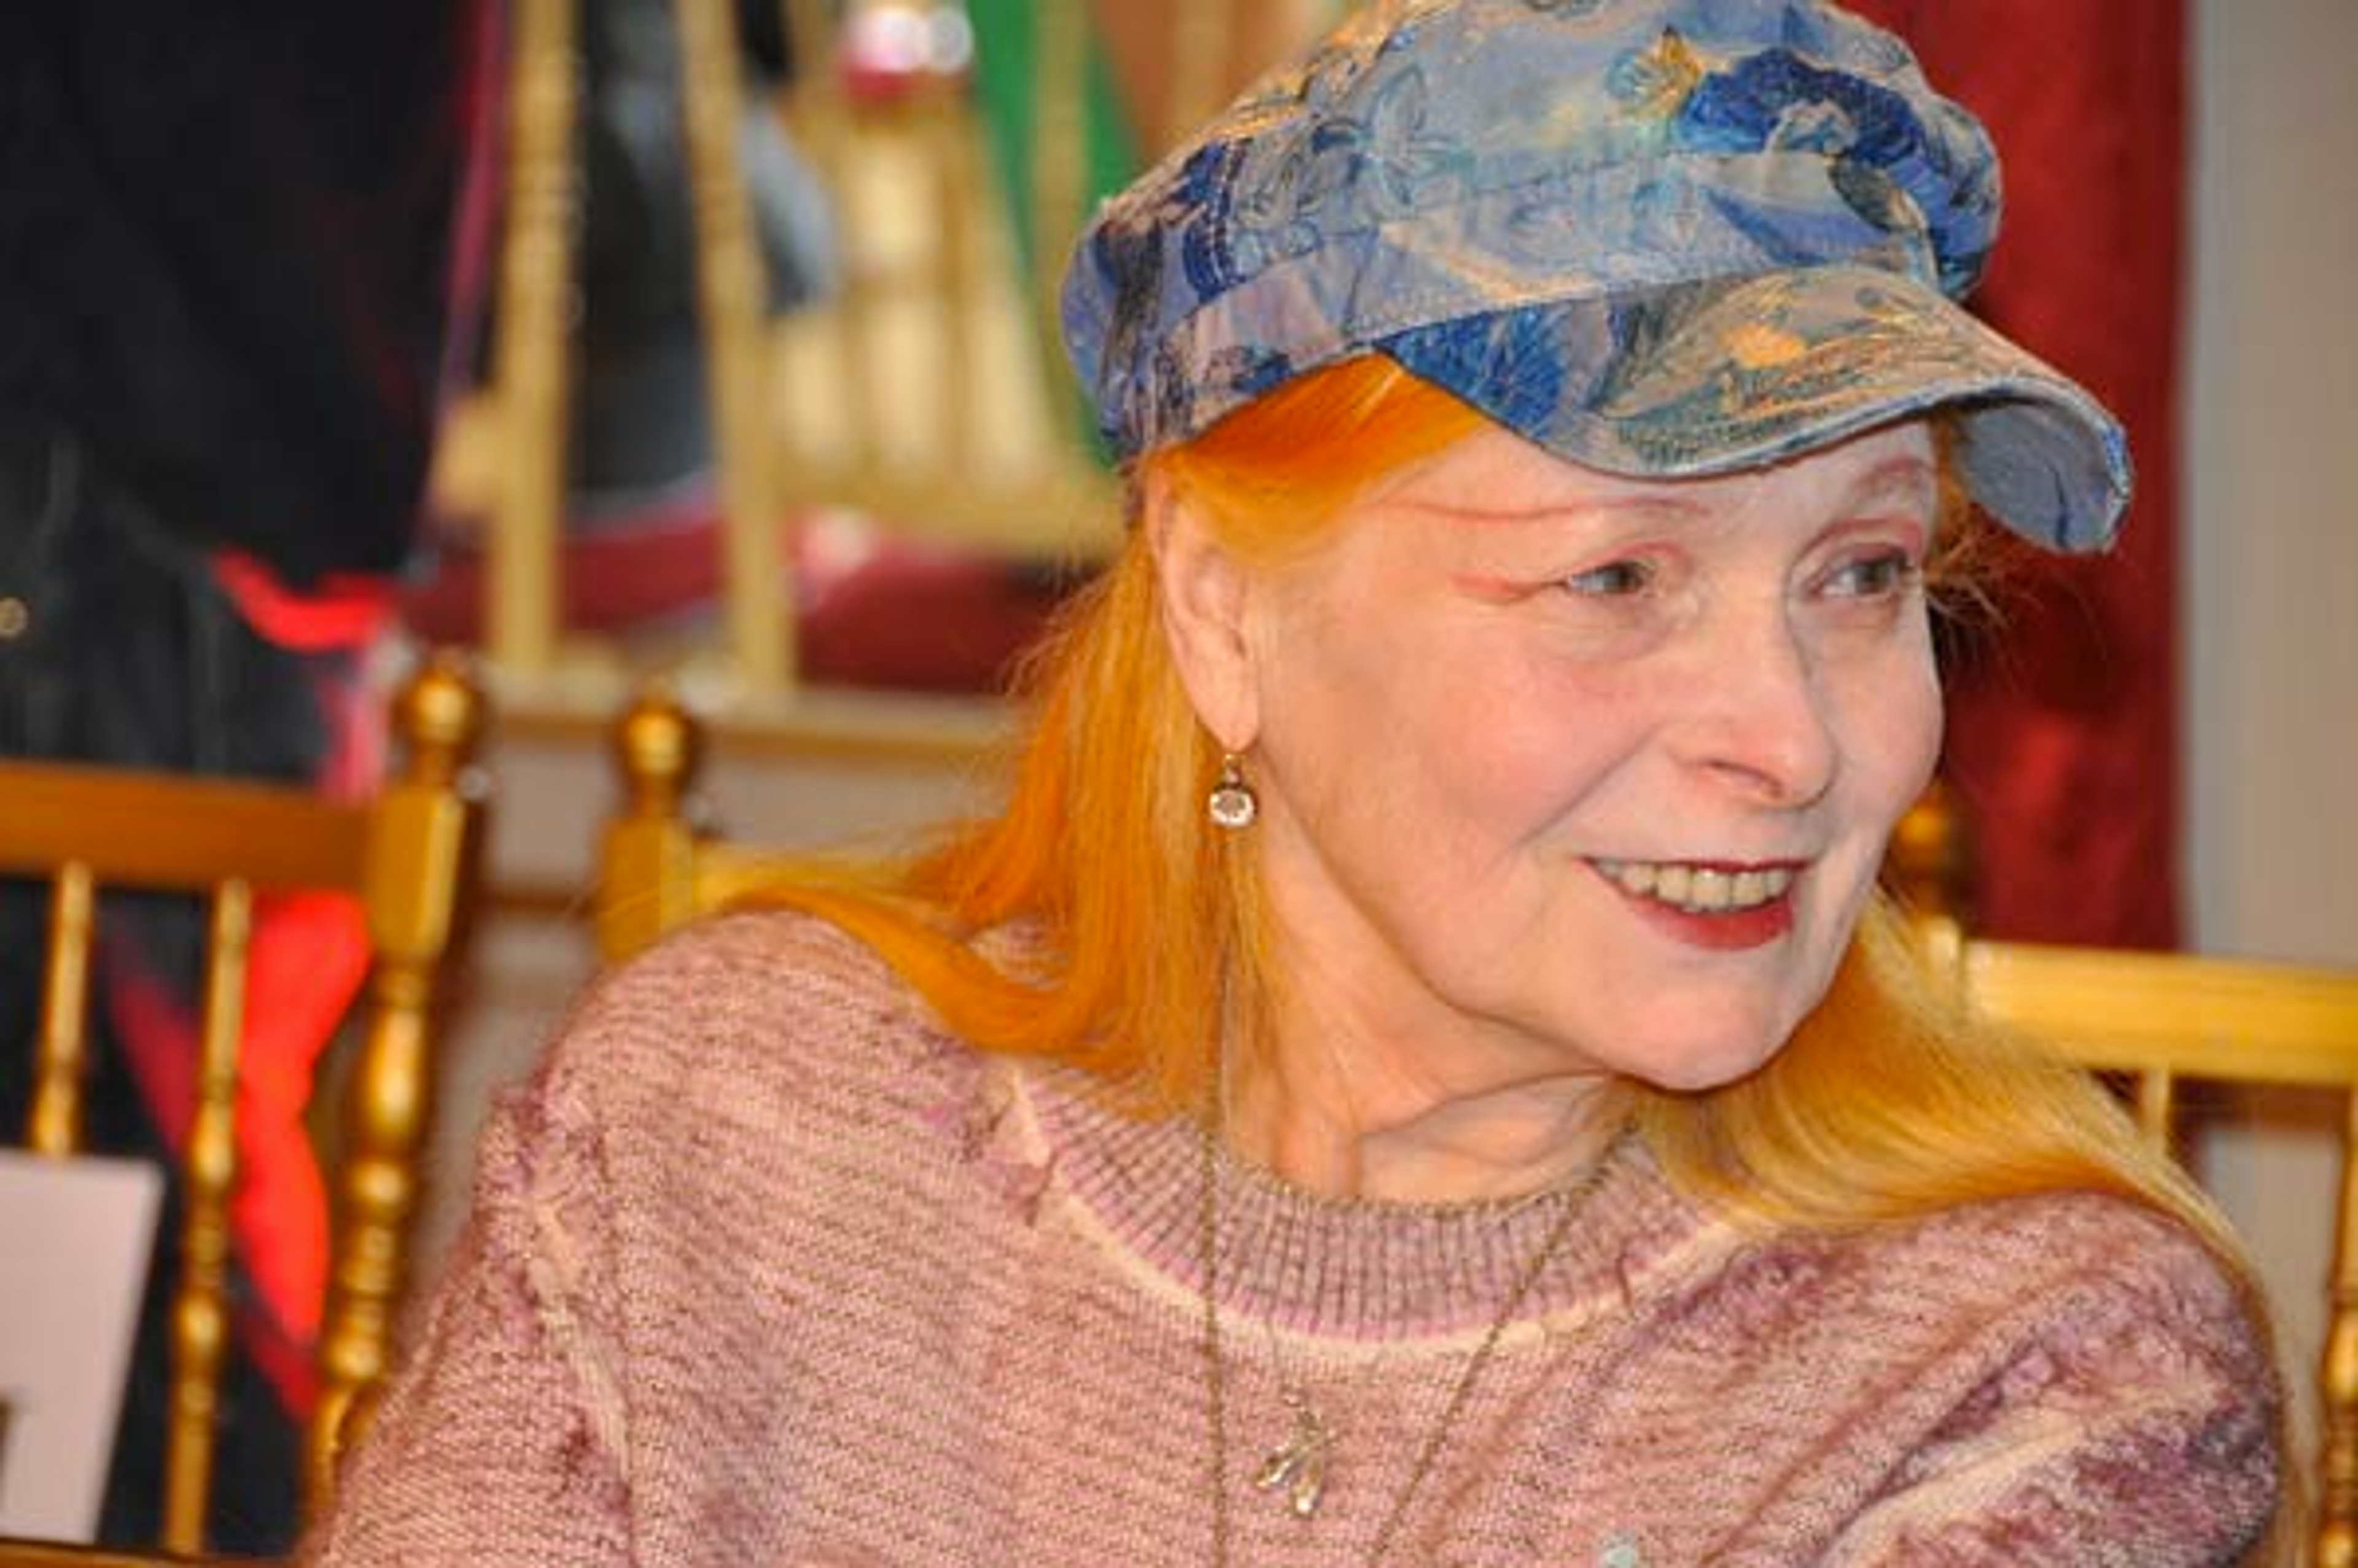 An image of the designer Vivienne Westwood, with her signature orange hair. She is wearing a blue jeans hat, and a distressed pink jumper. She is smiling at someone off-camera.